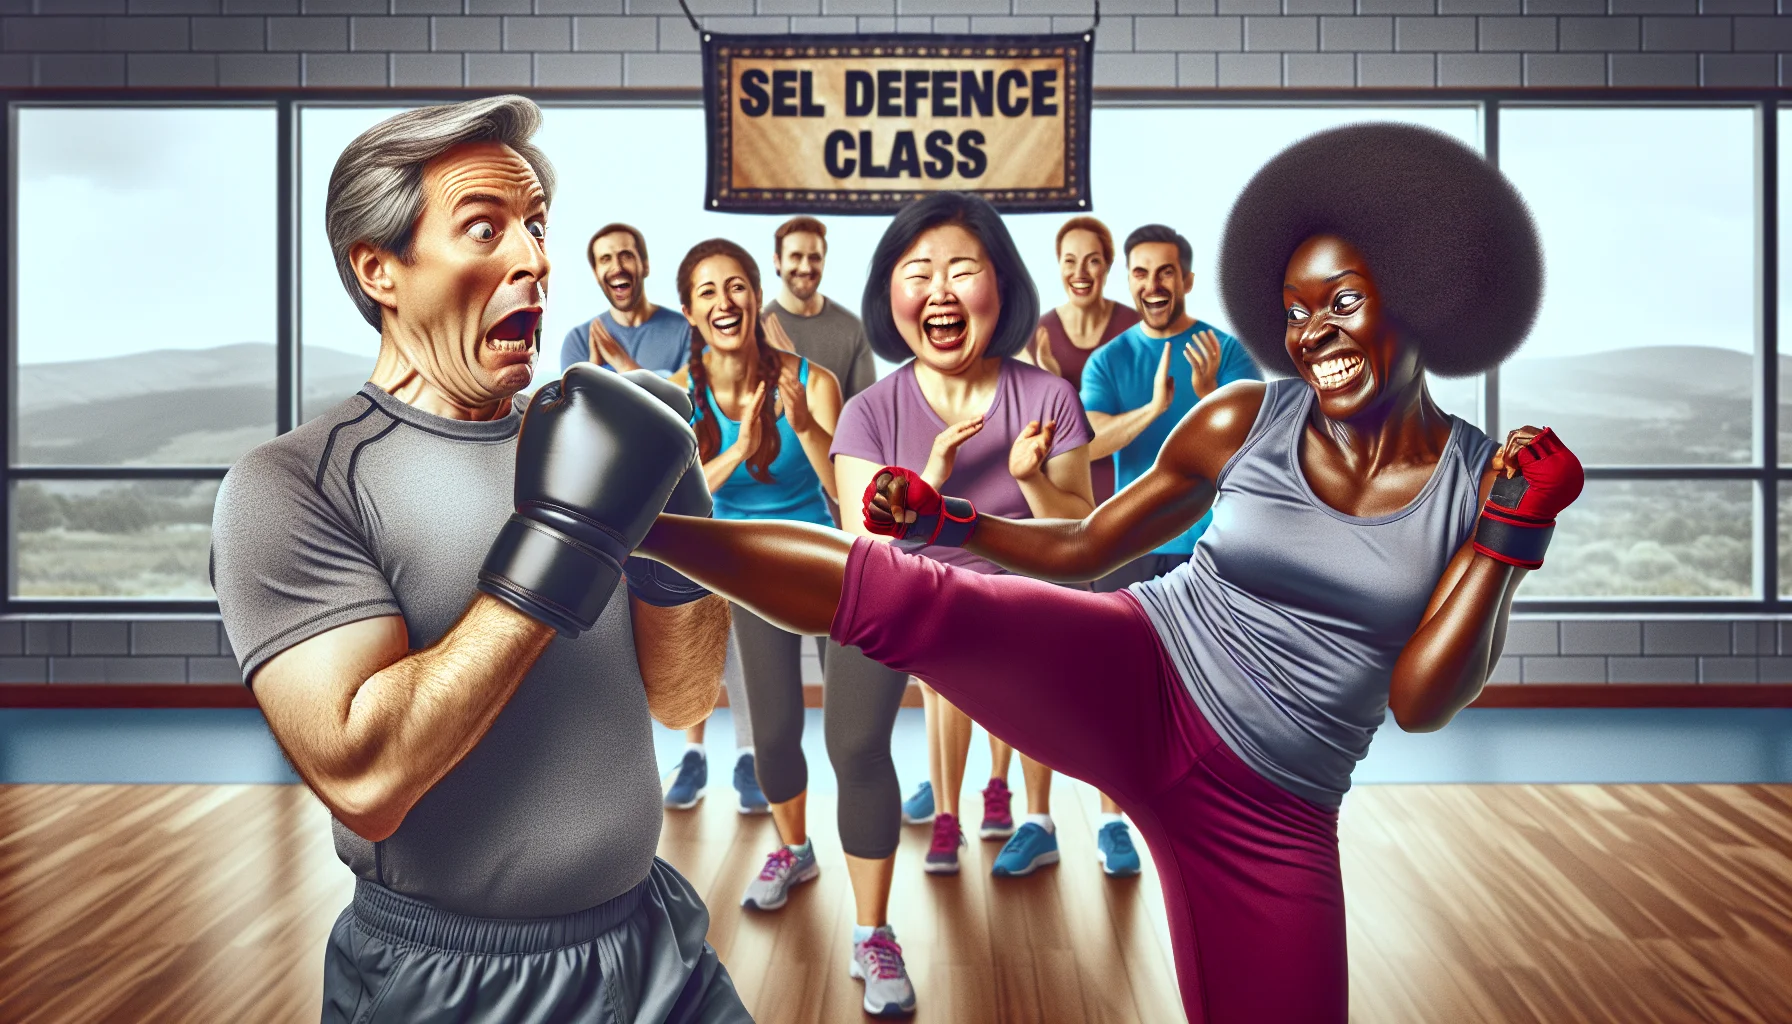 Depict a humorous scene showcasing kickboxing for self-defense in a fitness context. Show a middle-aged Caucasian man, with a surprised expression, blocked by a swift kick from a smaller, athletic, Black woman. She is chuckling while holding a kickboxing stance. Behind them, a diverse group of onlookers, including a South Asian male and Hispanic woman, laugh and cheer them on. The backdrop is a modern, brightly-lit gym with a 'Self Defence Class' banner hanging at the back. This scene will inspire and entice viewers to engage in physical exercise.